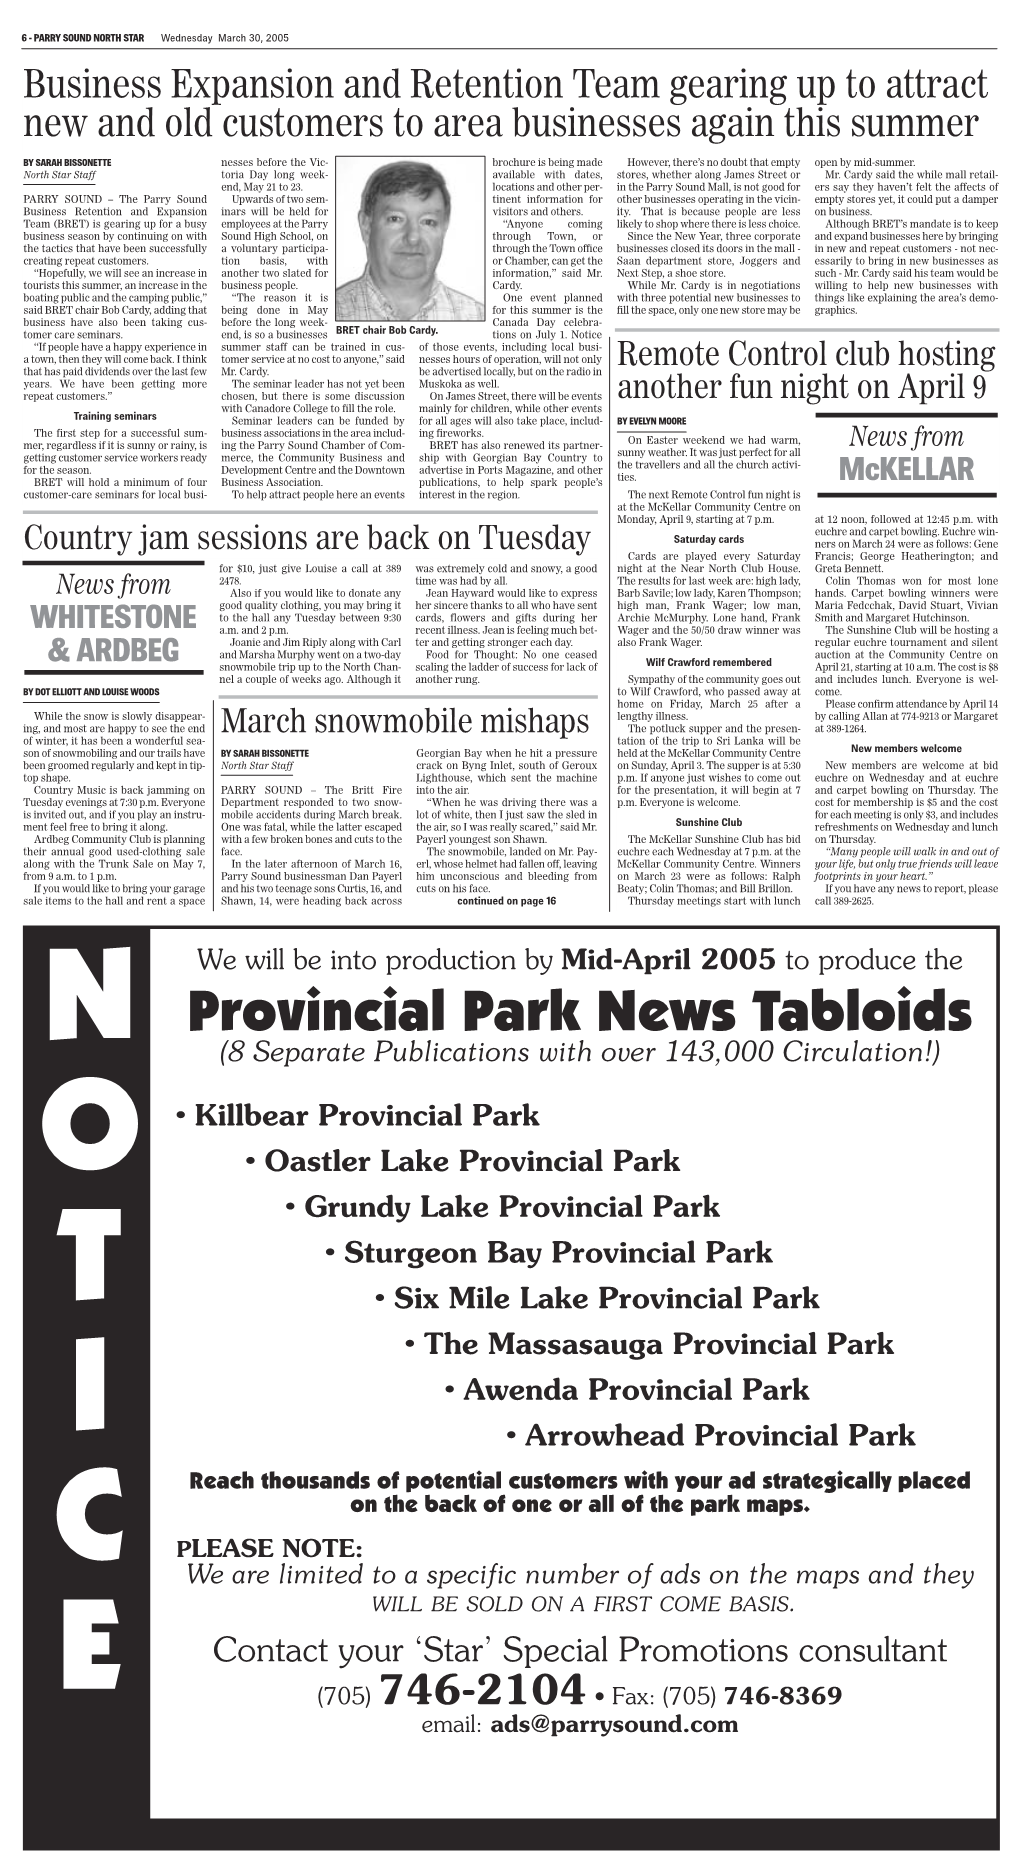 Provincial Park News Tabloids (8 Separate Publications with Over 143,000 Circulation!)